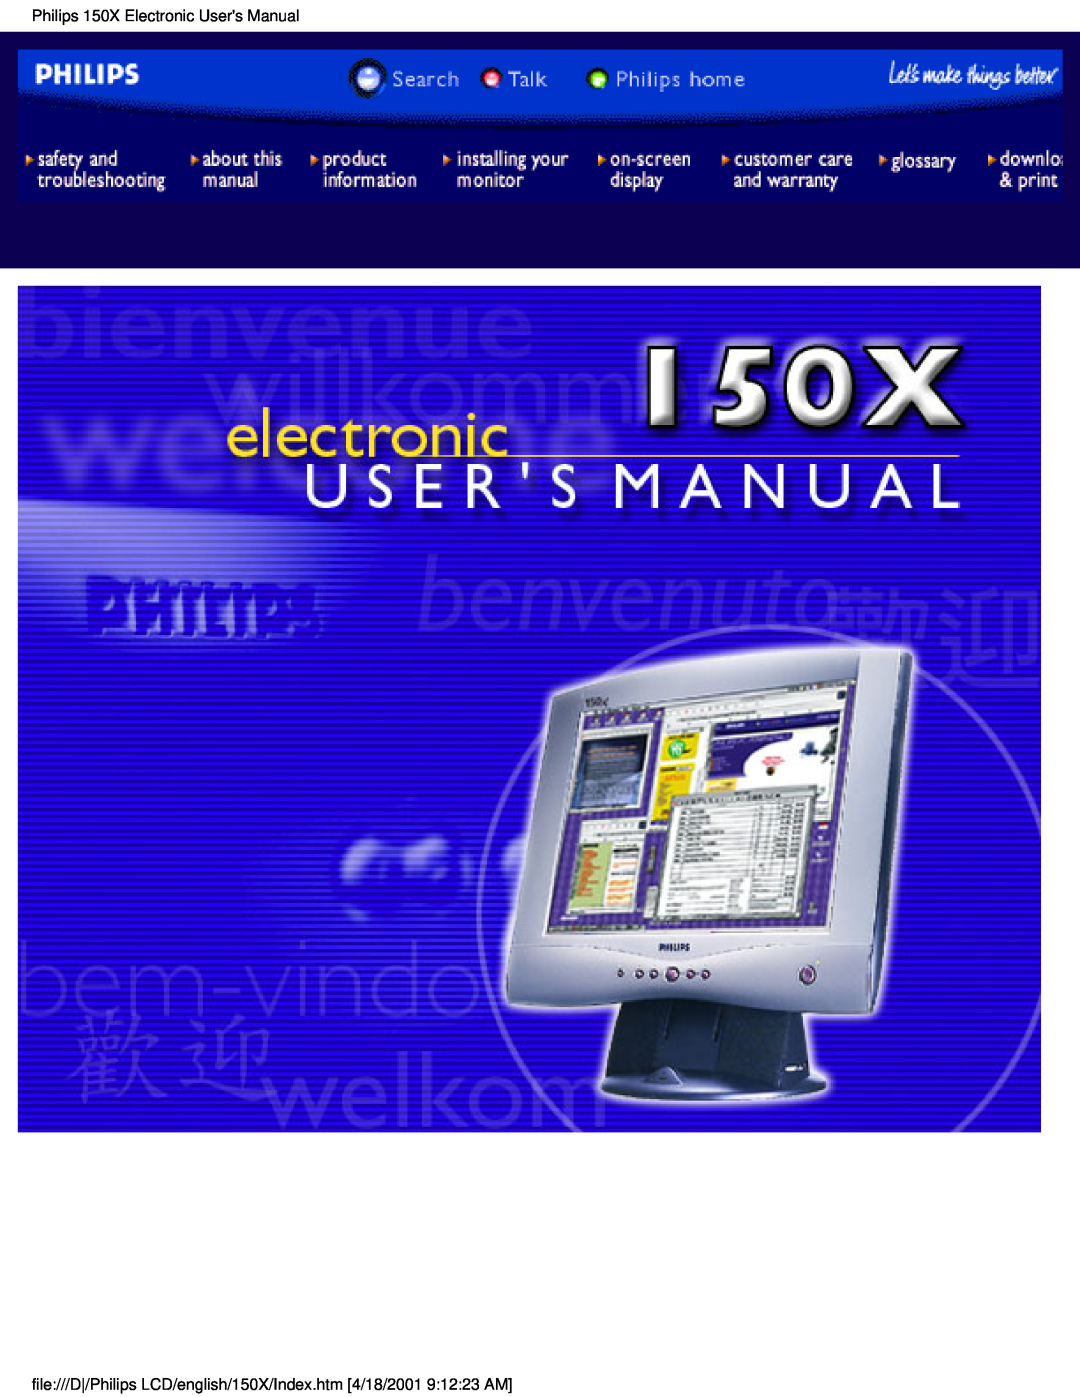 Philips user manual file///D/Philips LCD/english/150X/Index.htm 4/18/2001 91223 AM 